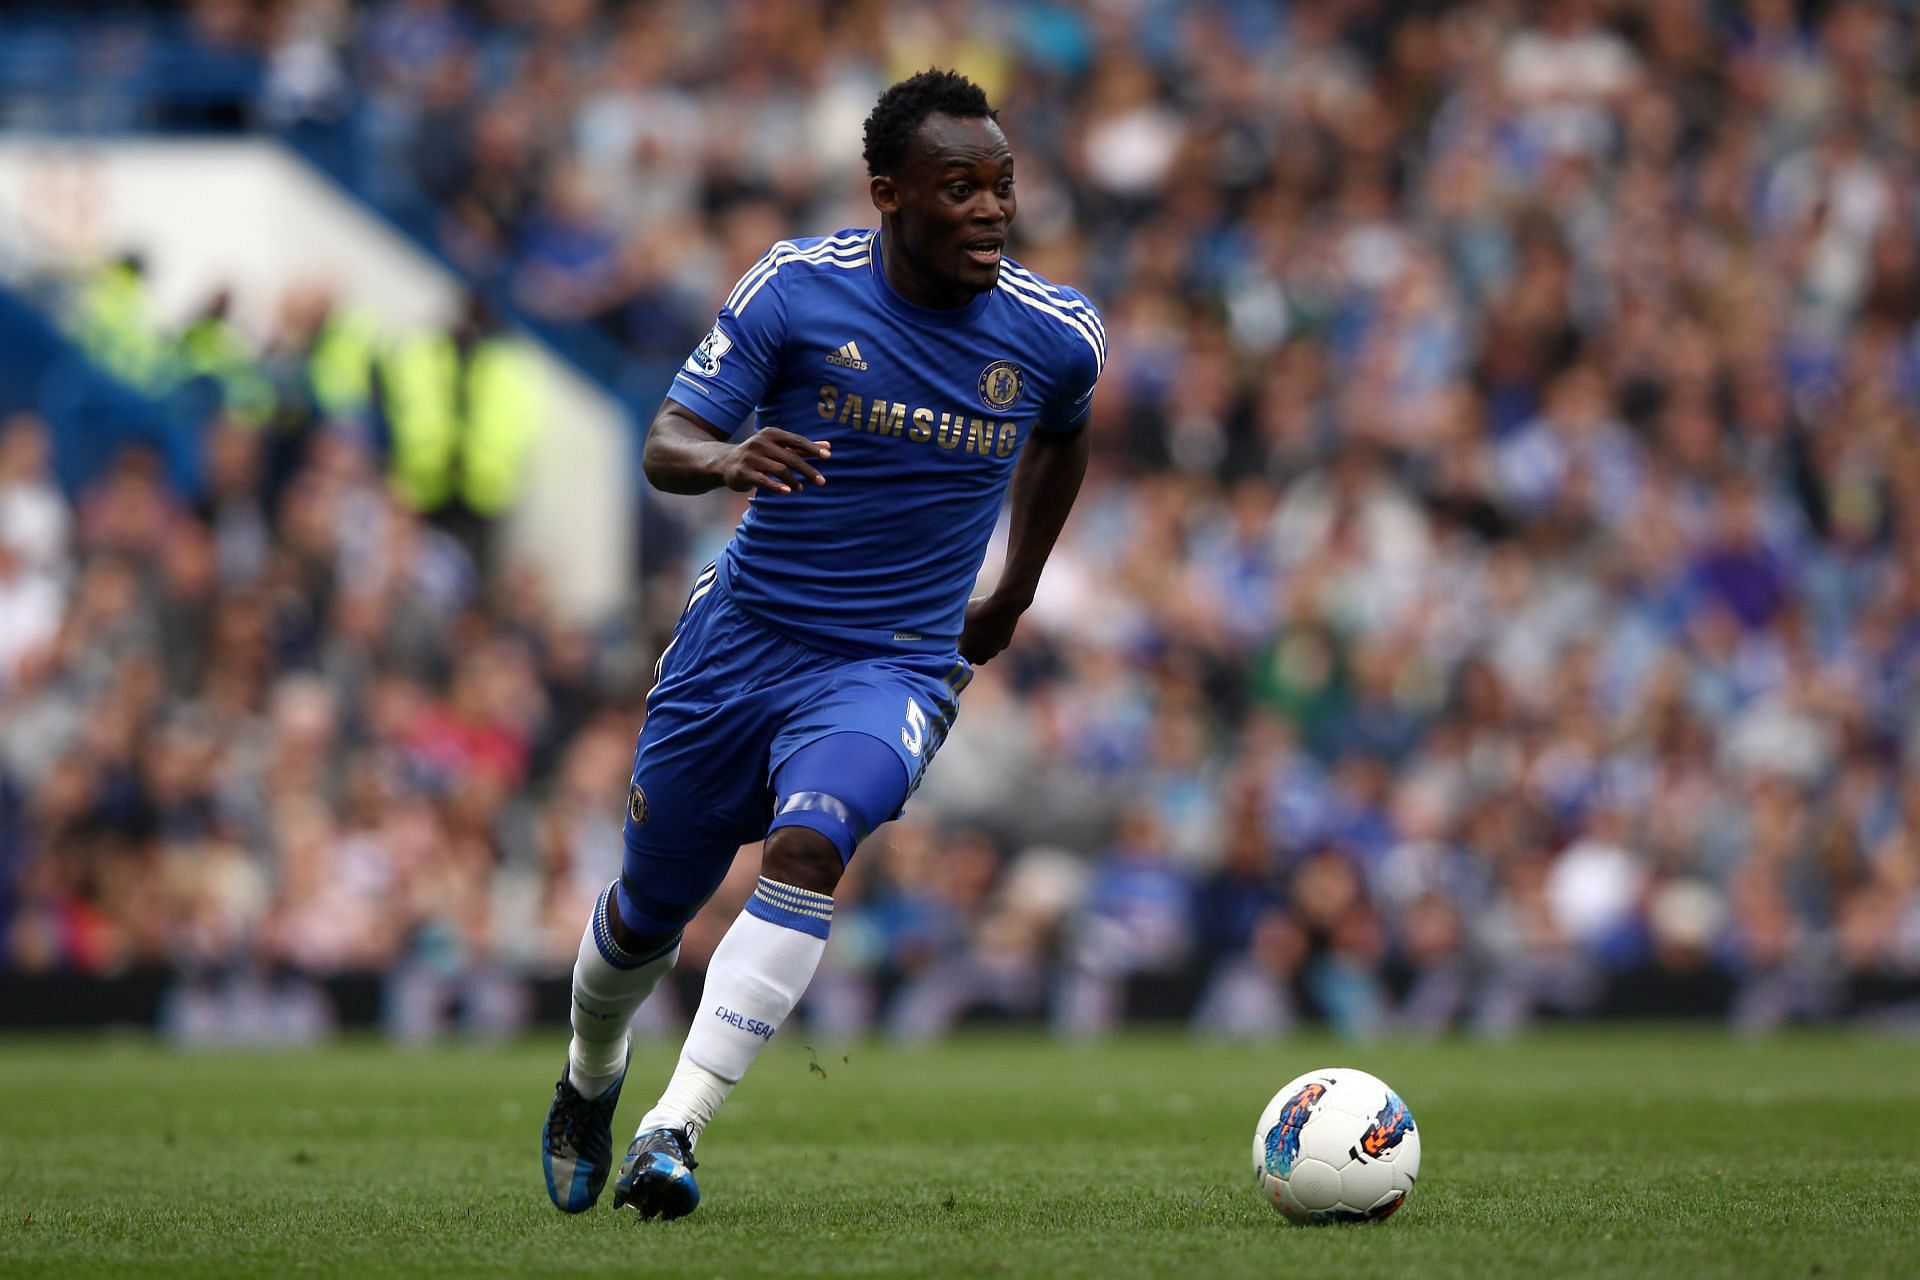 Essien enjoyed a great spell with Chelsea